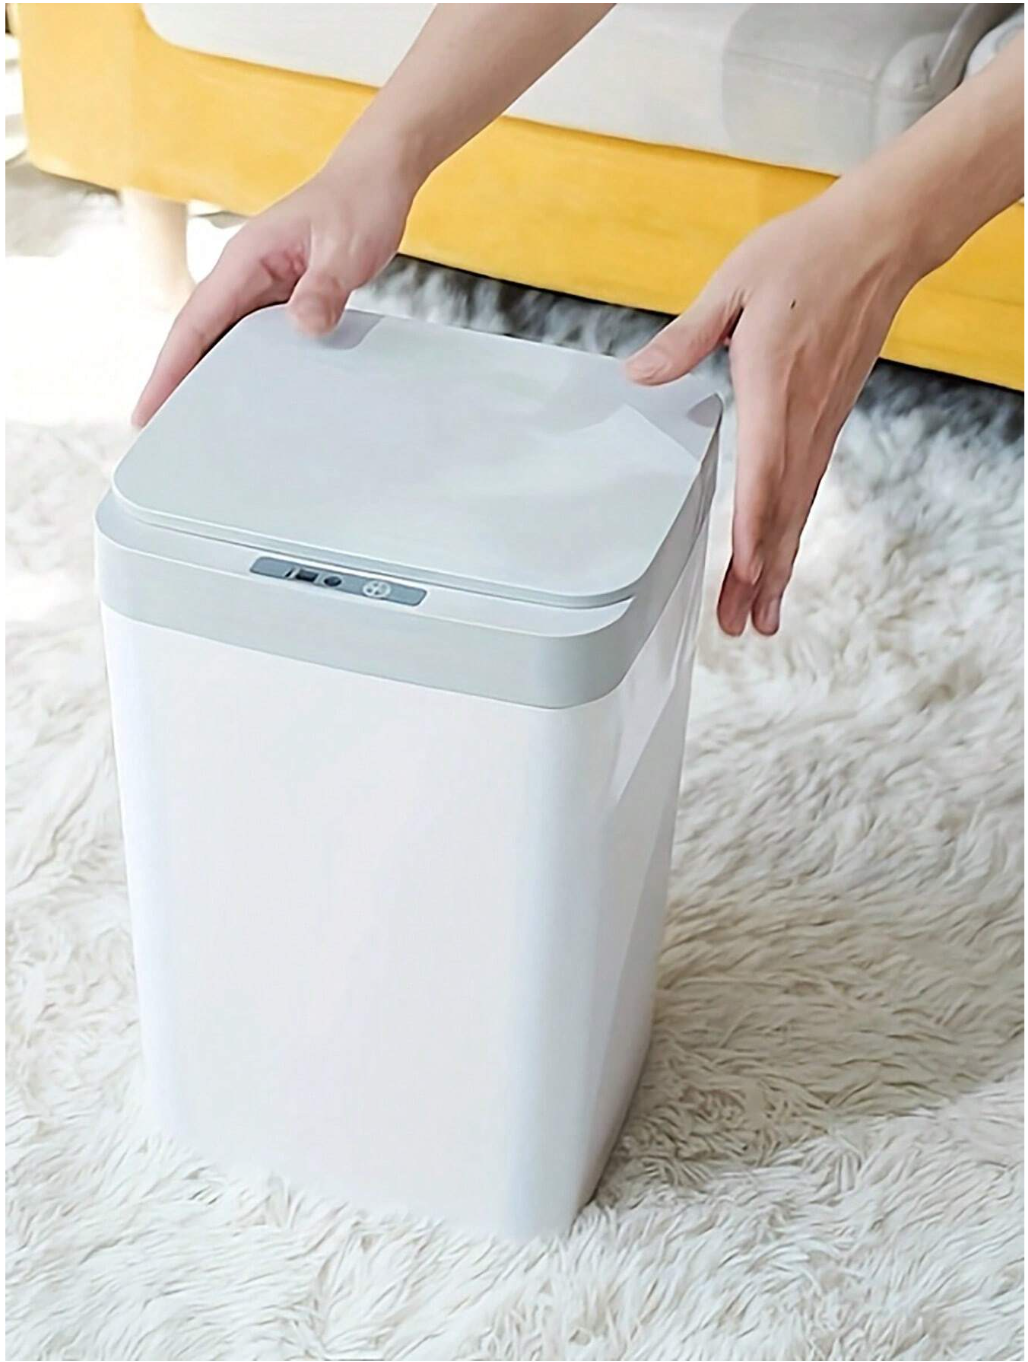 Smart Living, Clean Spaces: Intelligent Sensor Trash Can with Lid – Ideal for Kitchen, Bathroom, Living Room, and Office in Crisp White (Battery Version, Batteries Not Included)